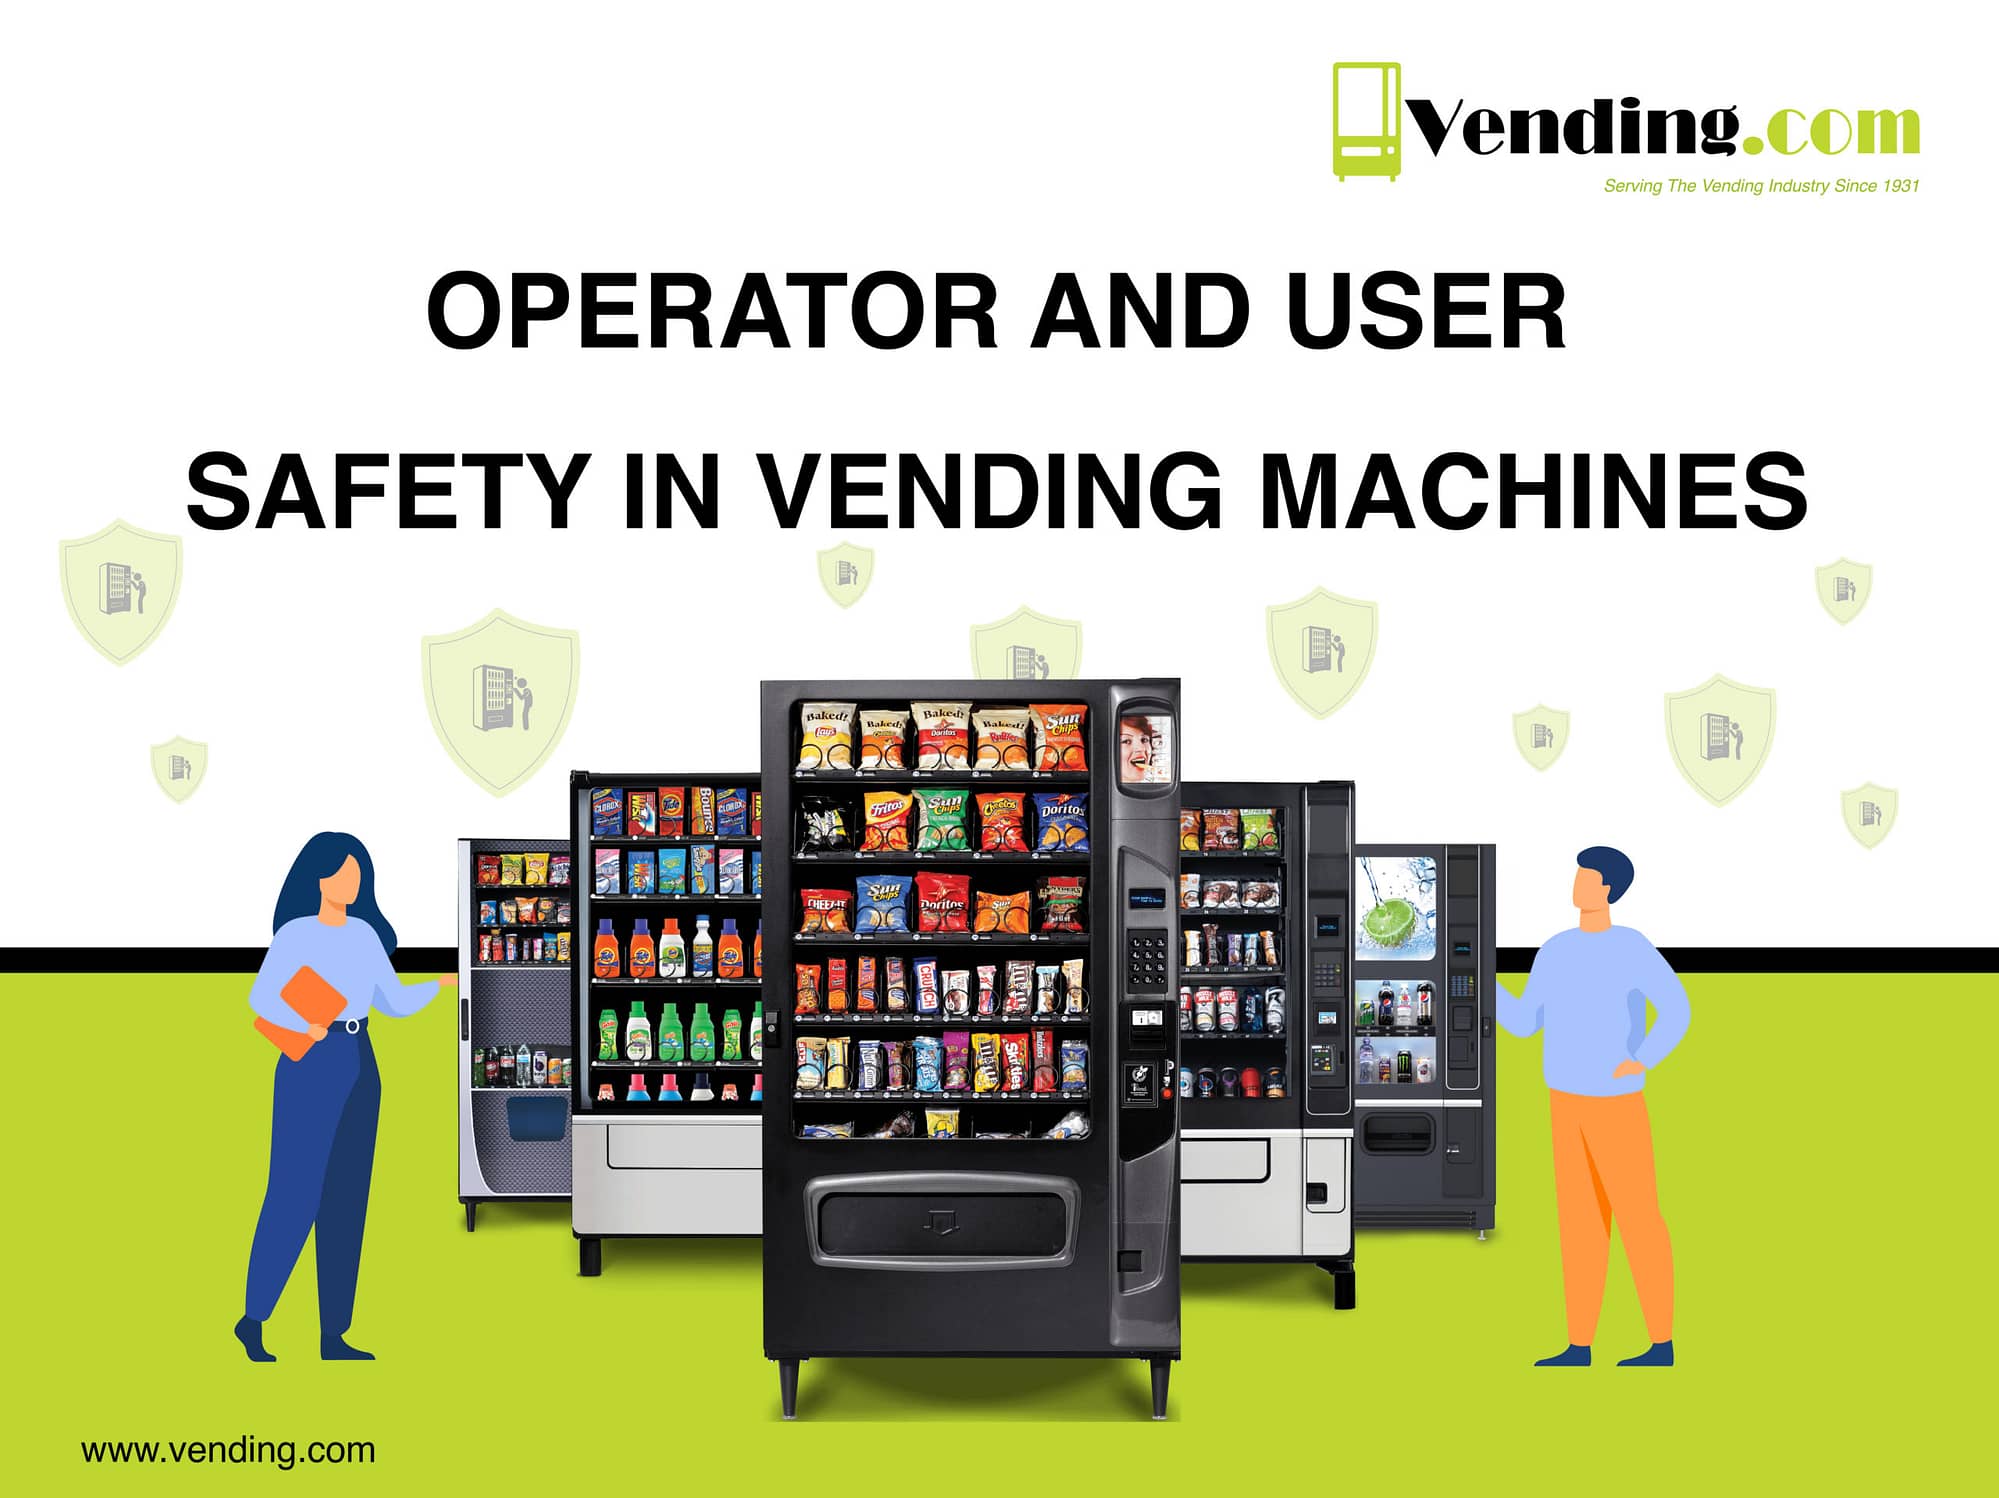 Vending.com - Operator and user safety in vending machines